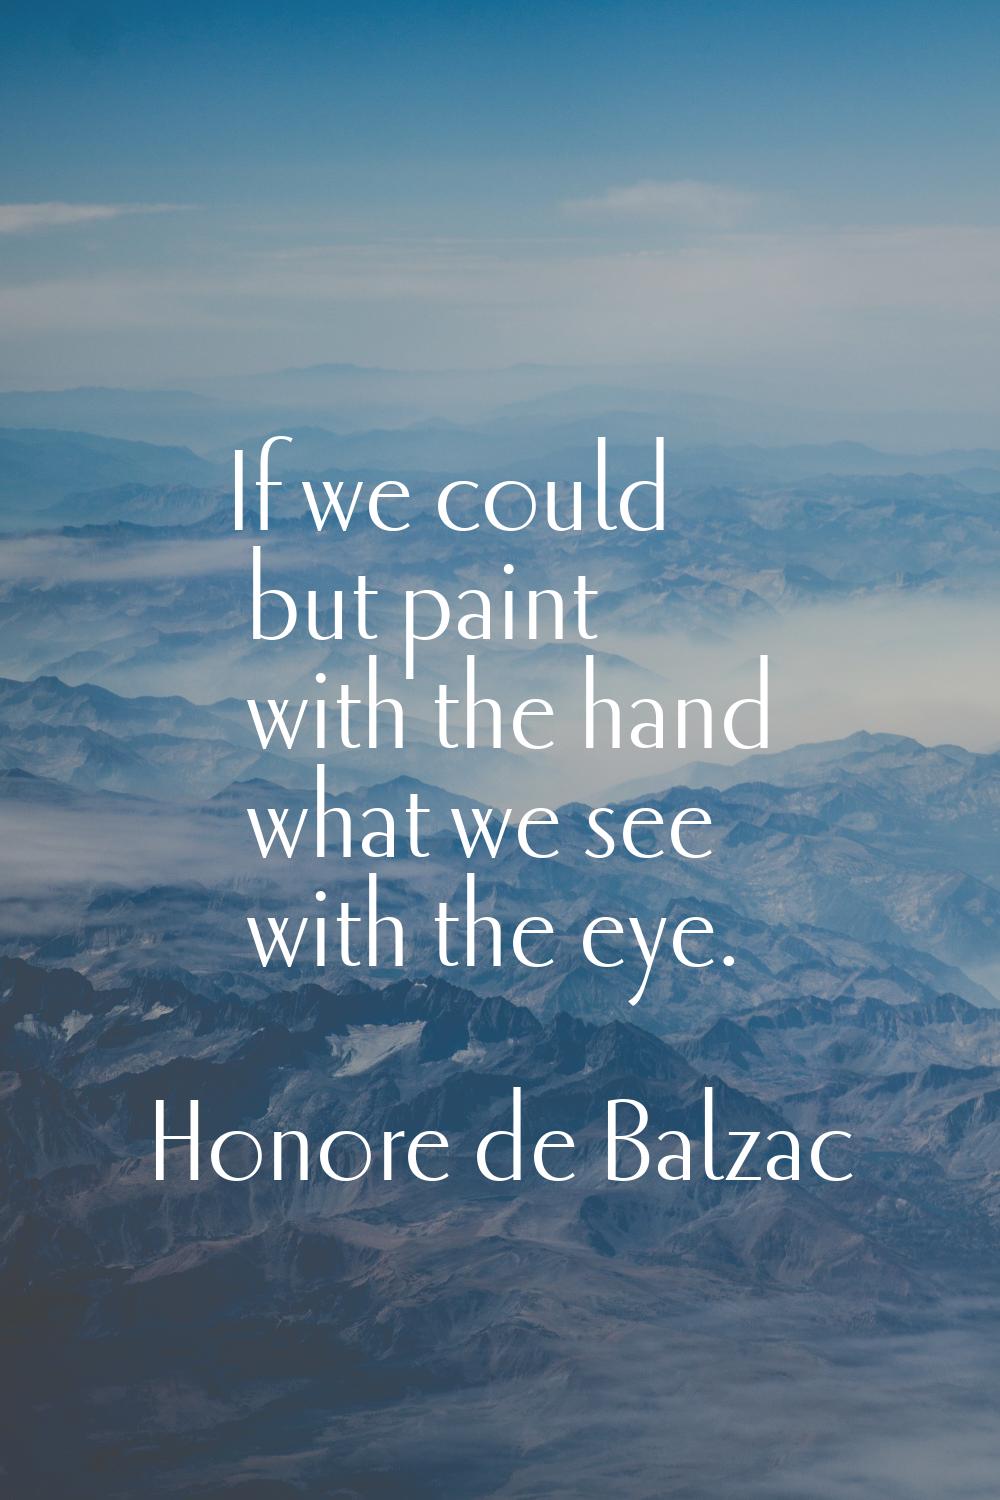 If we could but paint with the hand what we see with the eye.